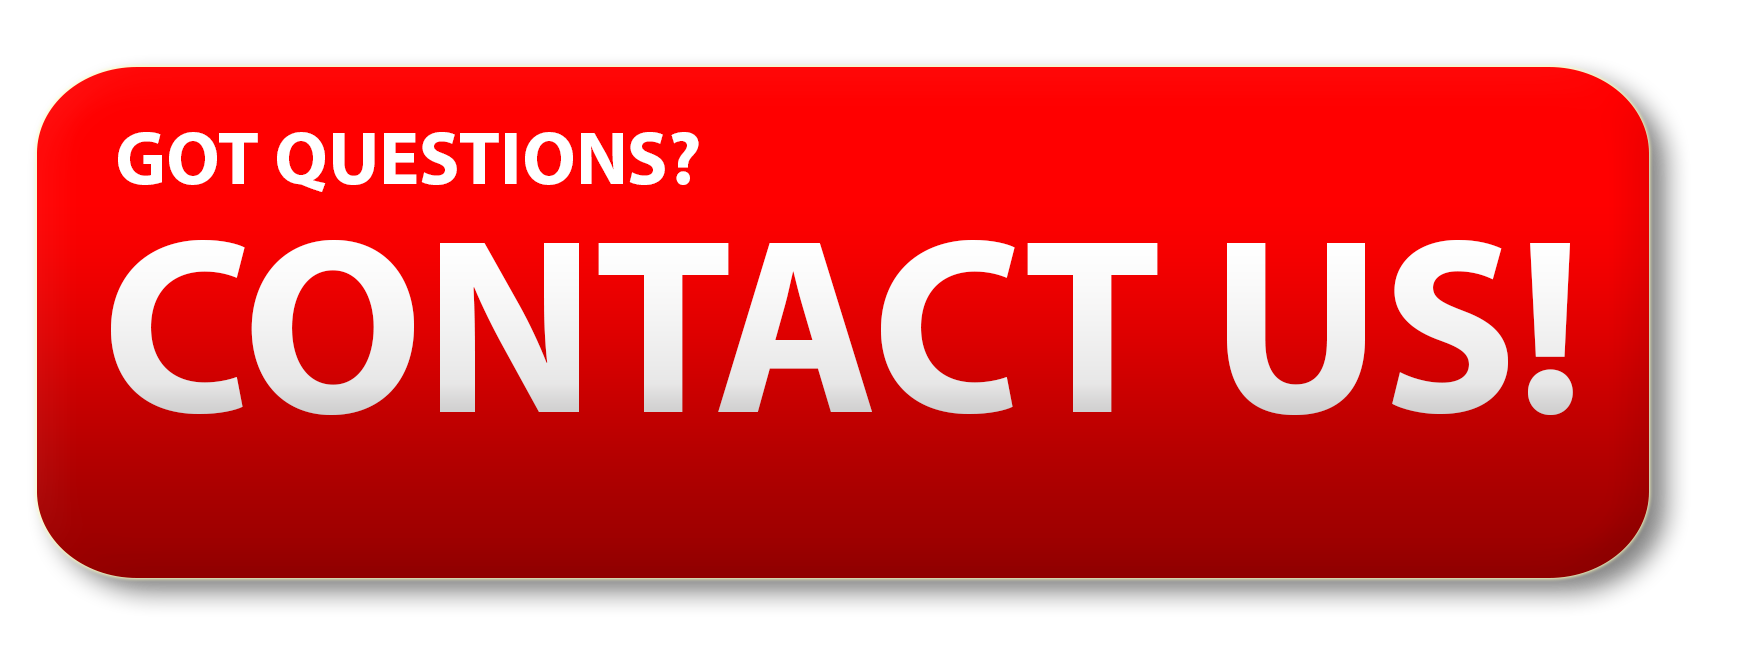 Contact Us Button Image